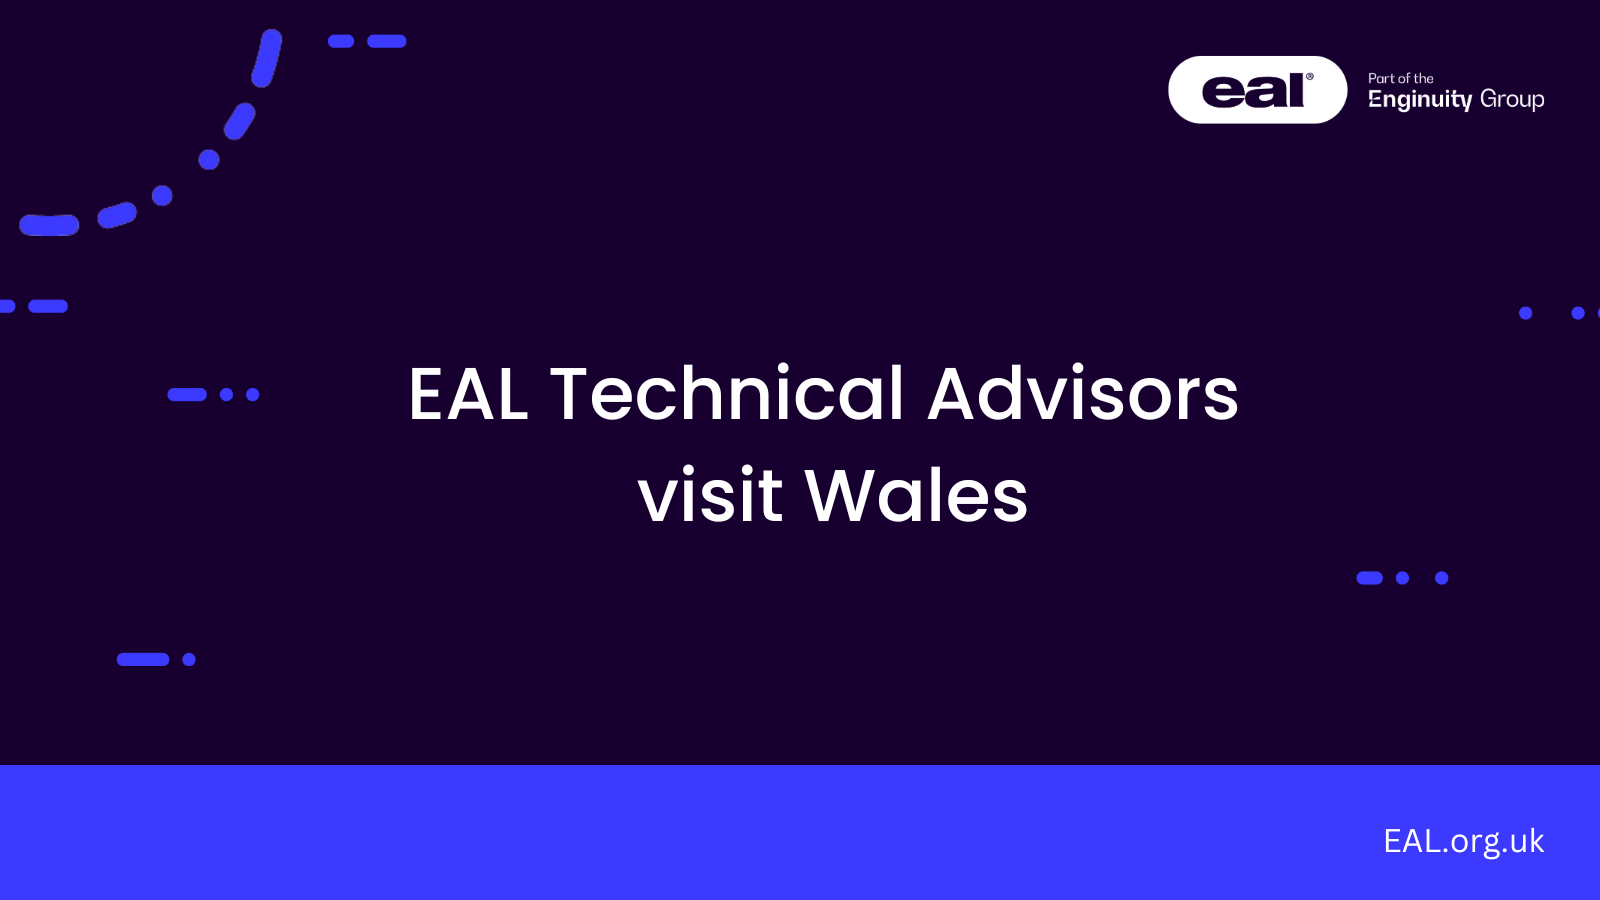 PowerPoint slide stating that EAL technical advisors are visiting Wales